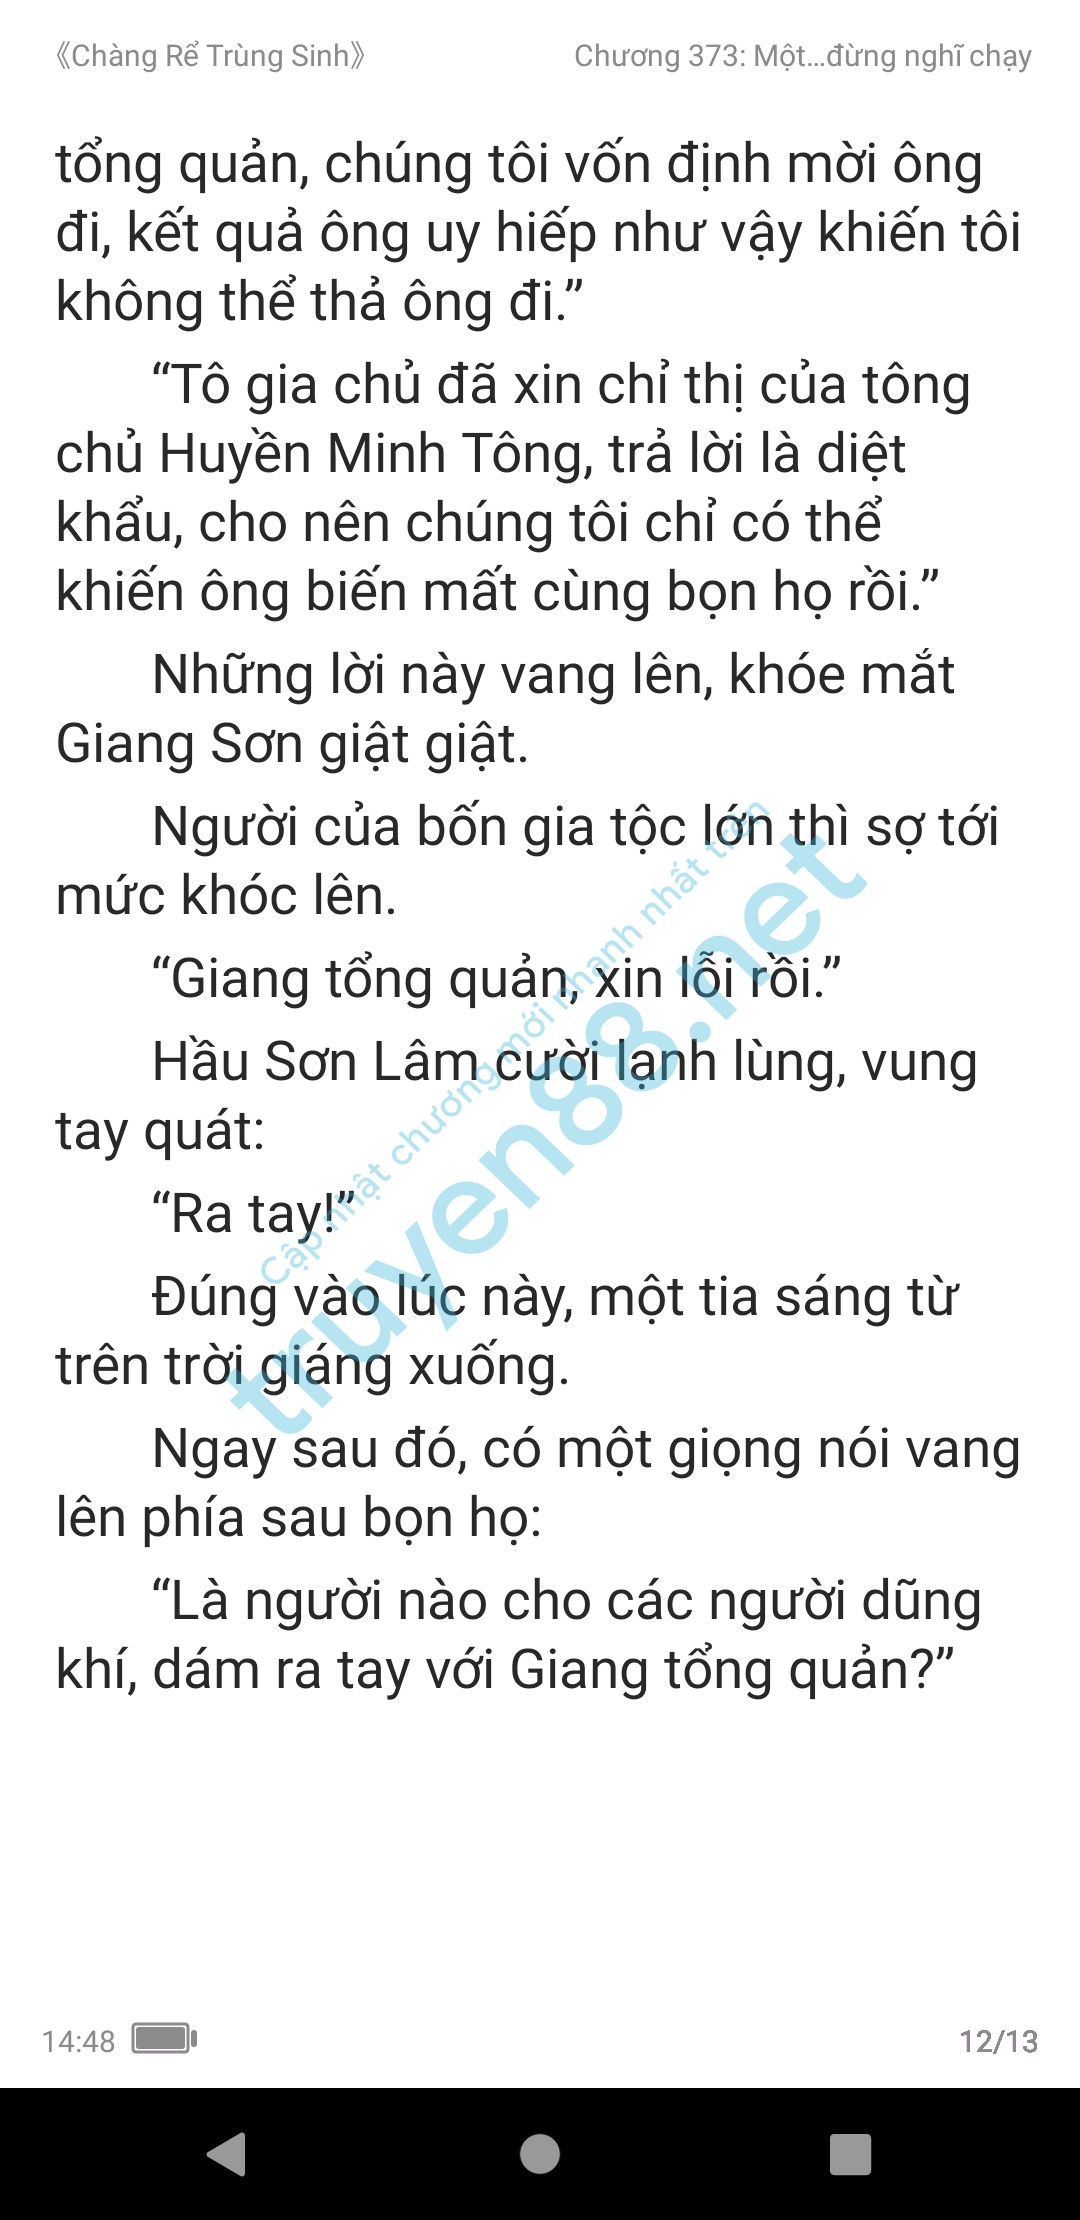 chang-re-trung-sinh-373-1